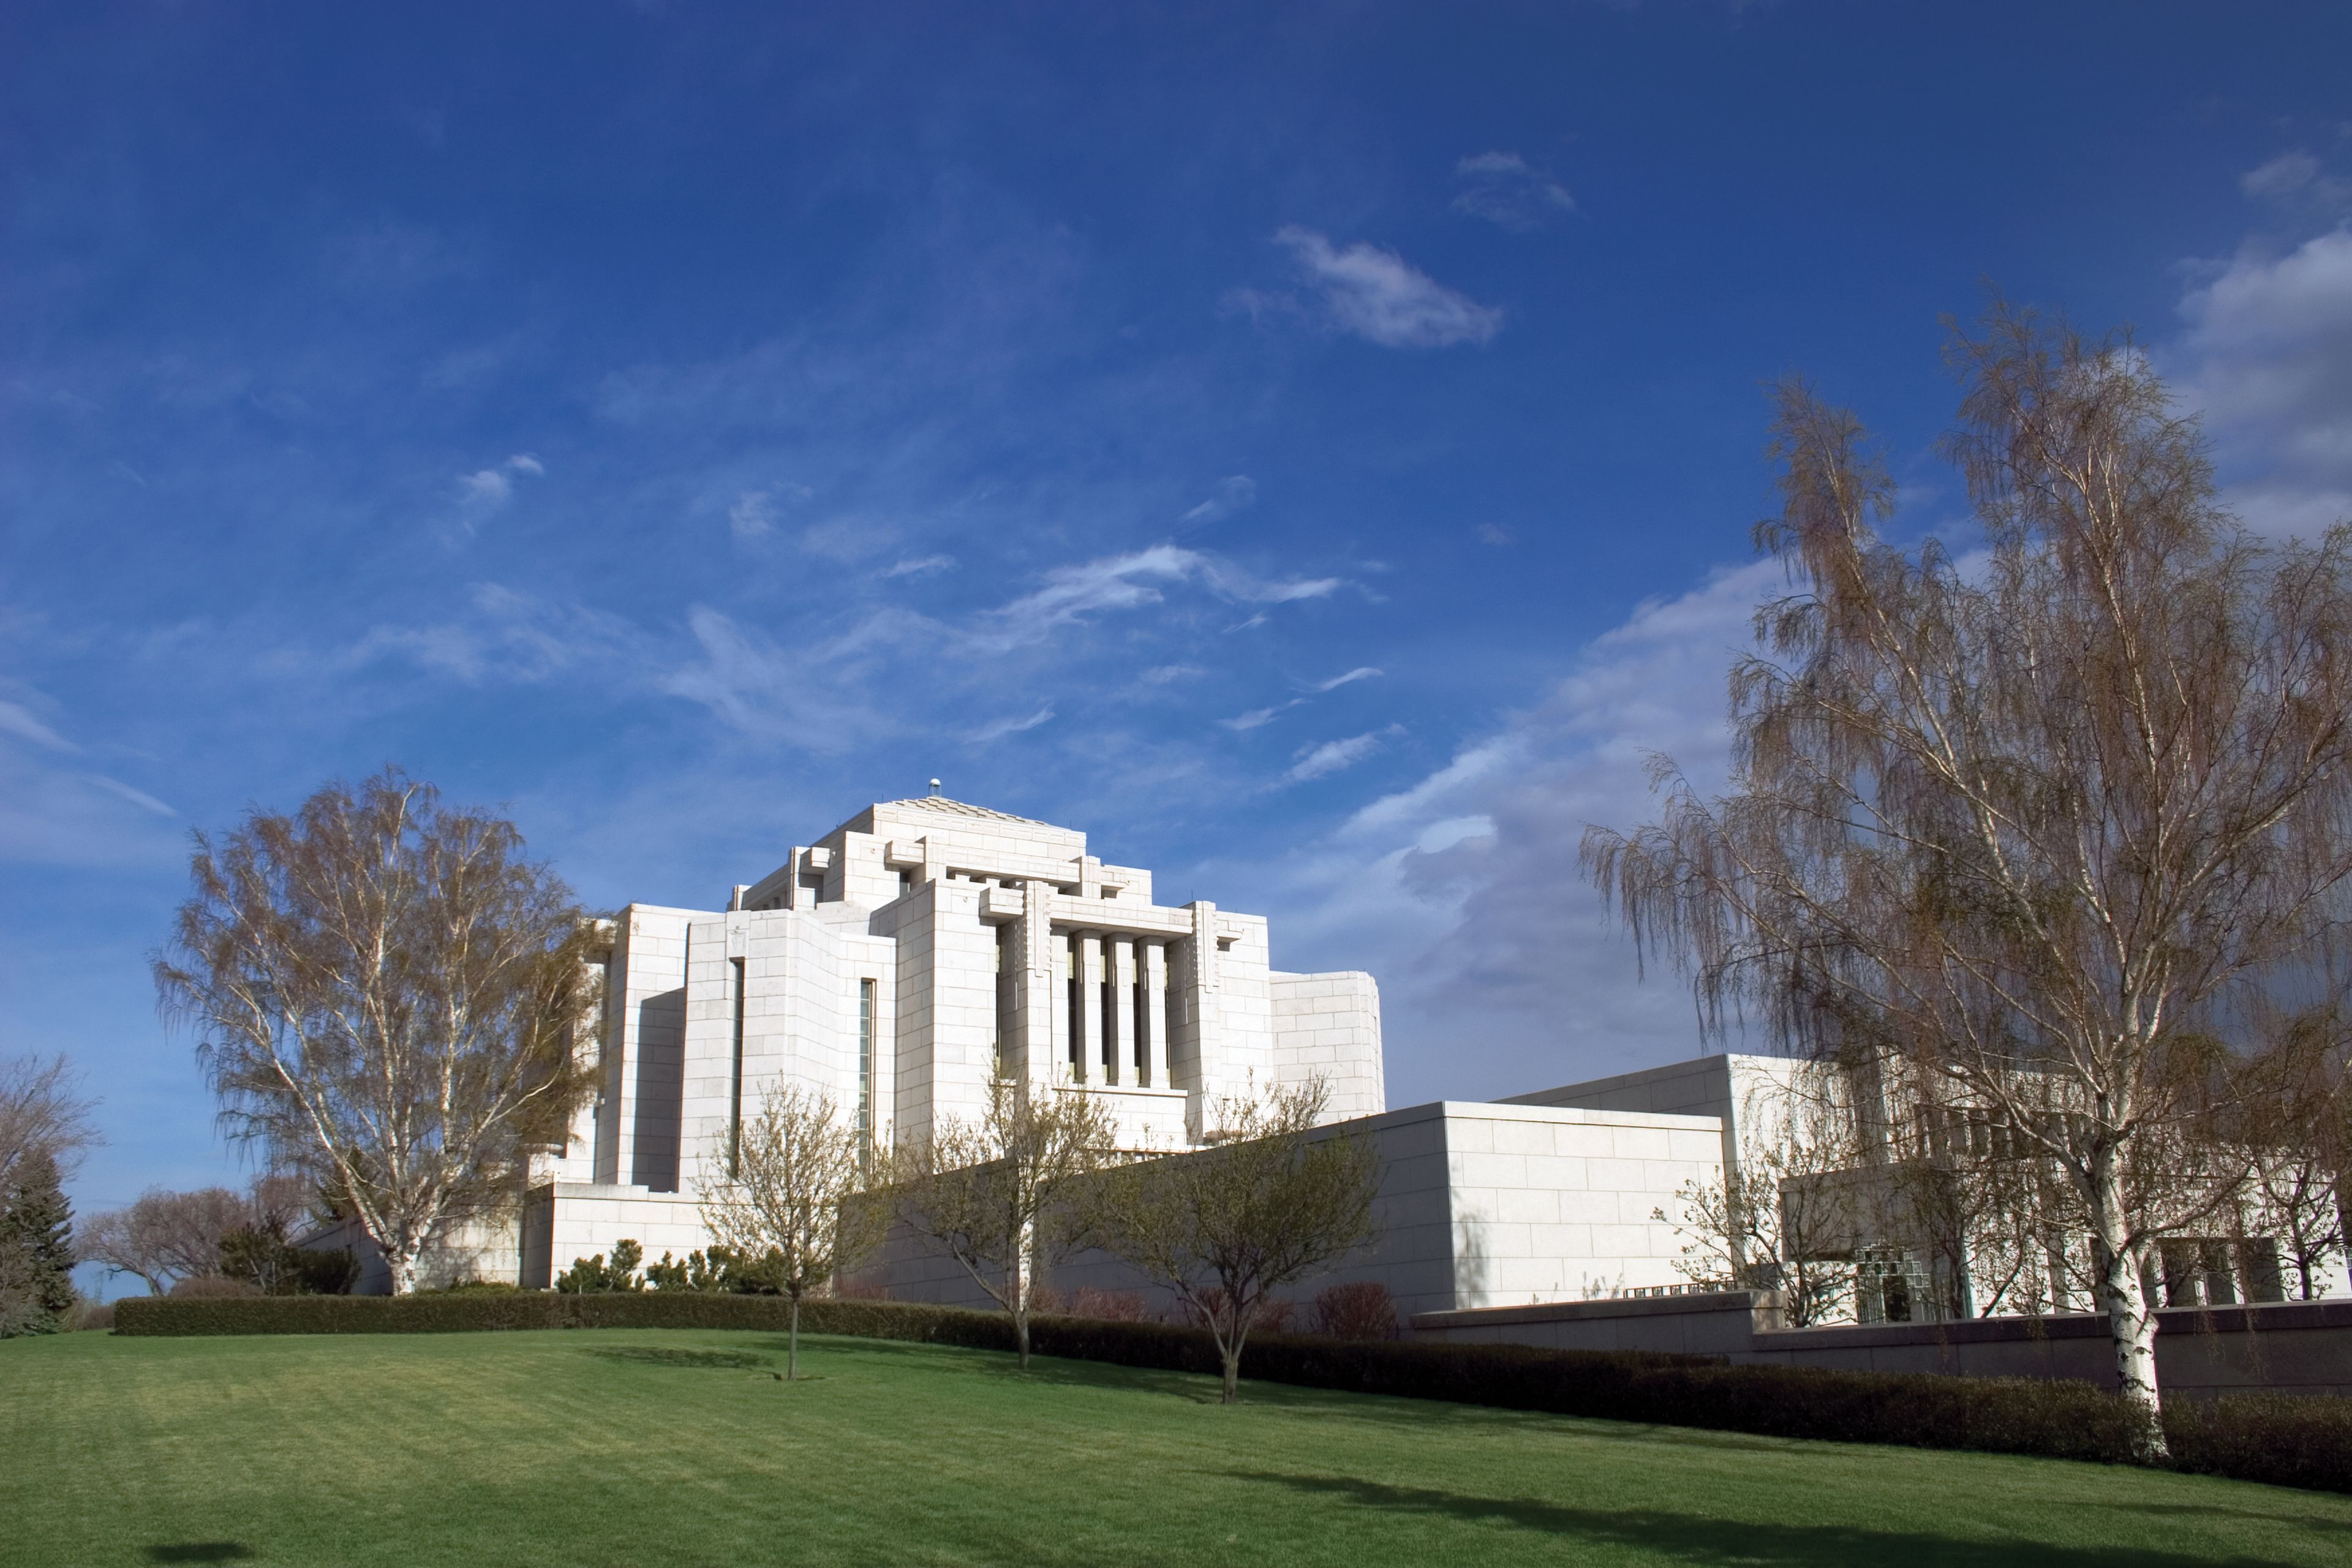 The Cardston Alberta Temple entrance, including scenery.